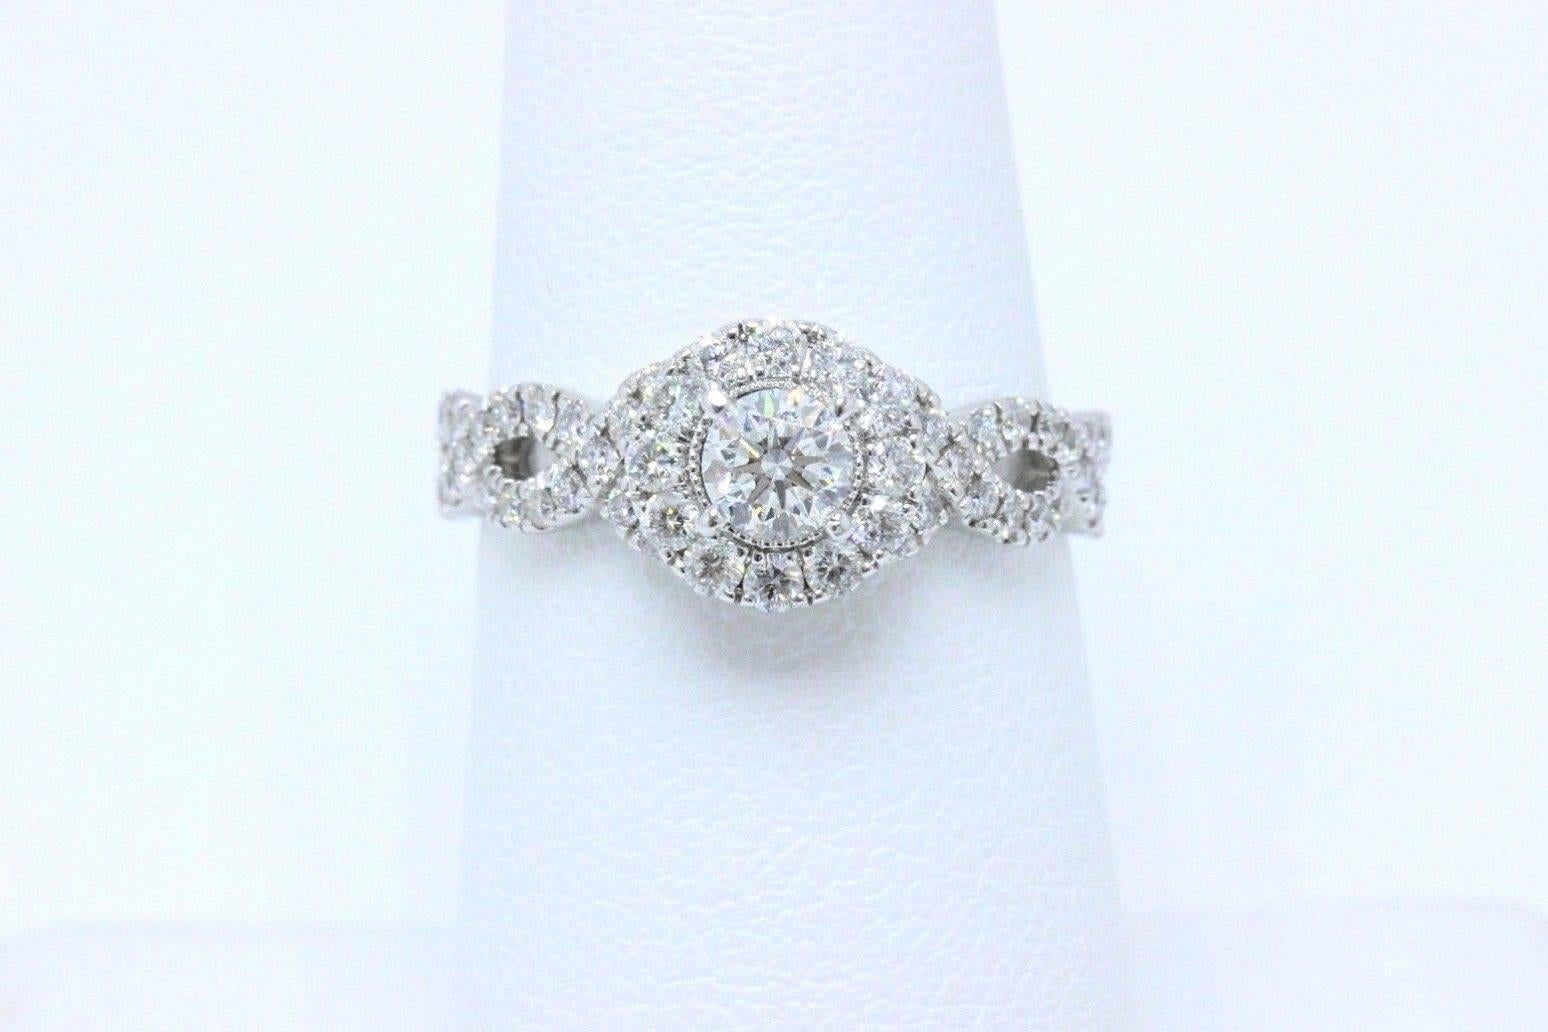 NEIL LANE BRIDAL COLLECTION
Style:  Halo with Diamond Pave Twisted Band 
Item Number:  20025416
Metal:  14K White Gold
Size:  6.75 - Sizable
Total Carat Weight:  1.00 TCW
Center Diamond Shape:  0.30 CTS
Diamond Color & Clarity:  I / I1
Accent